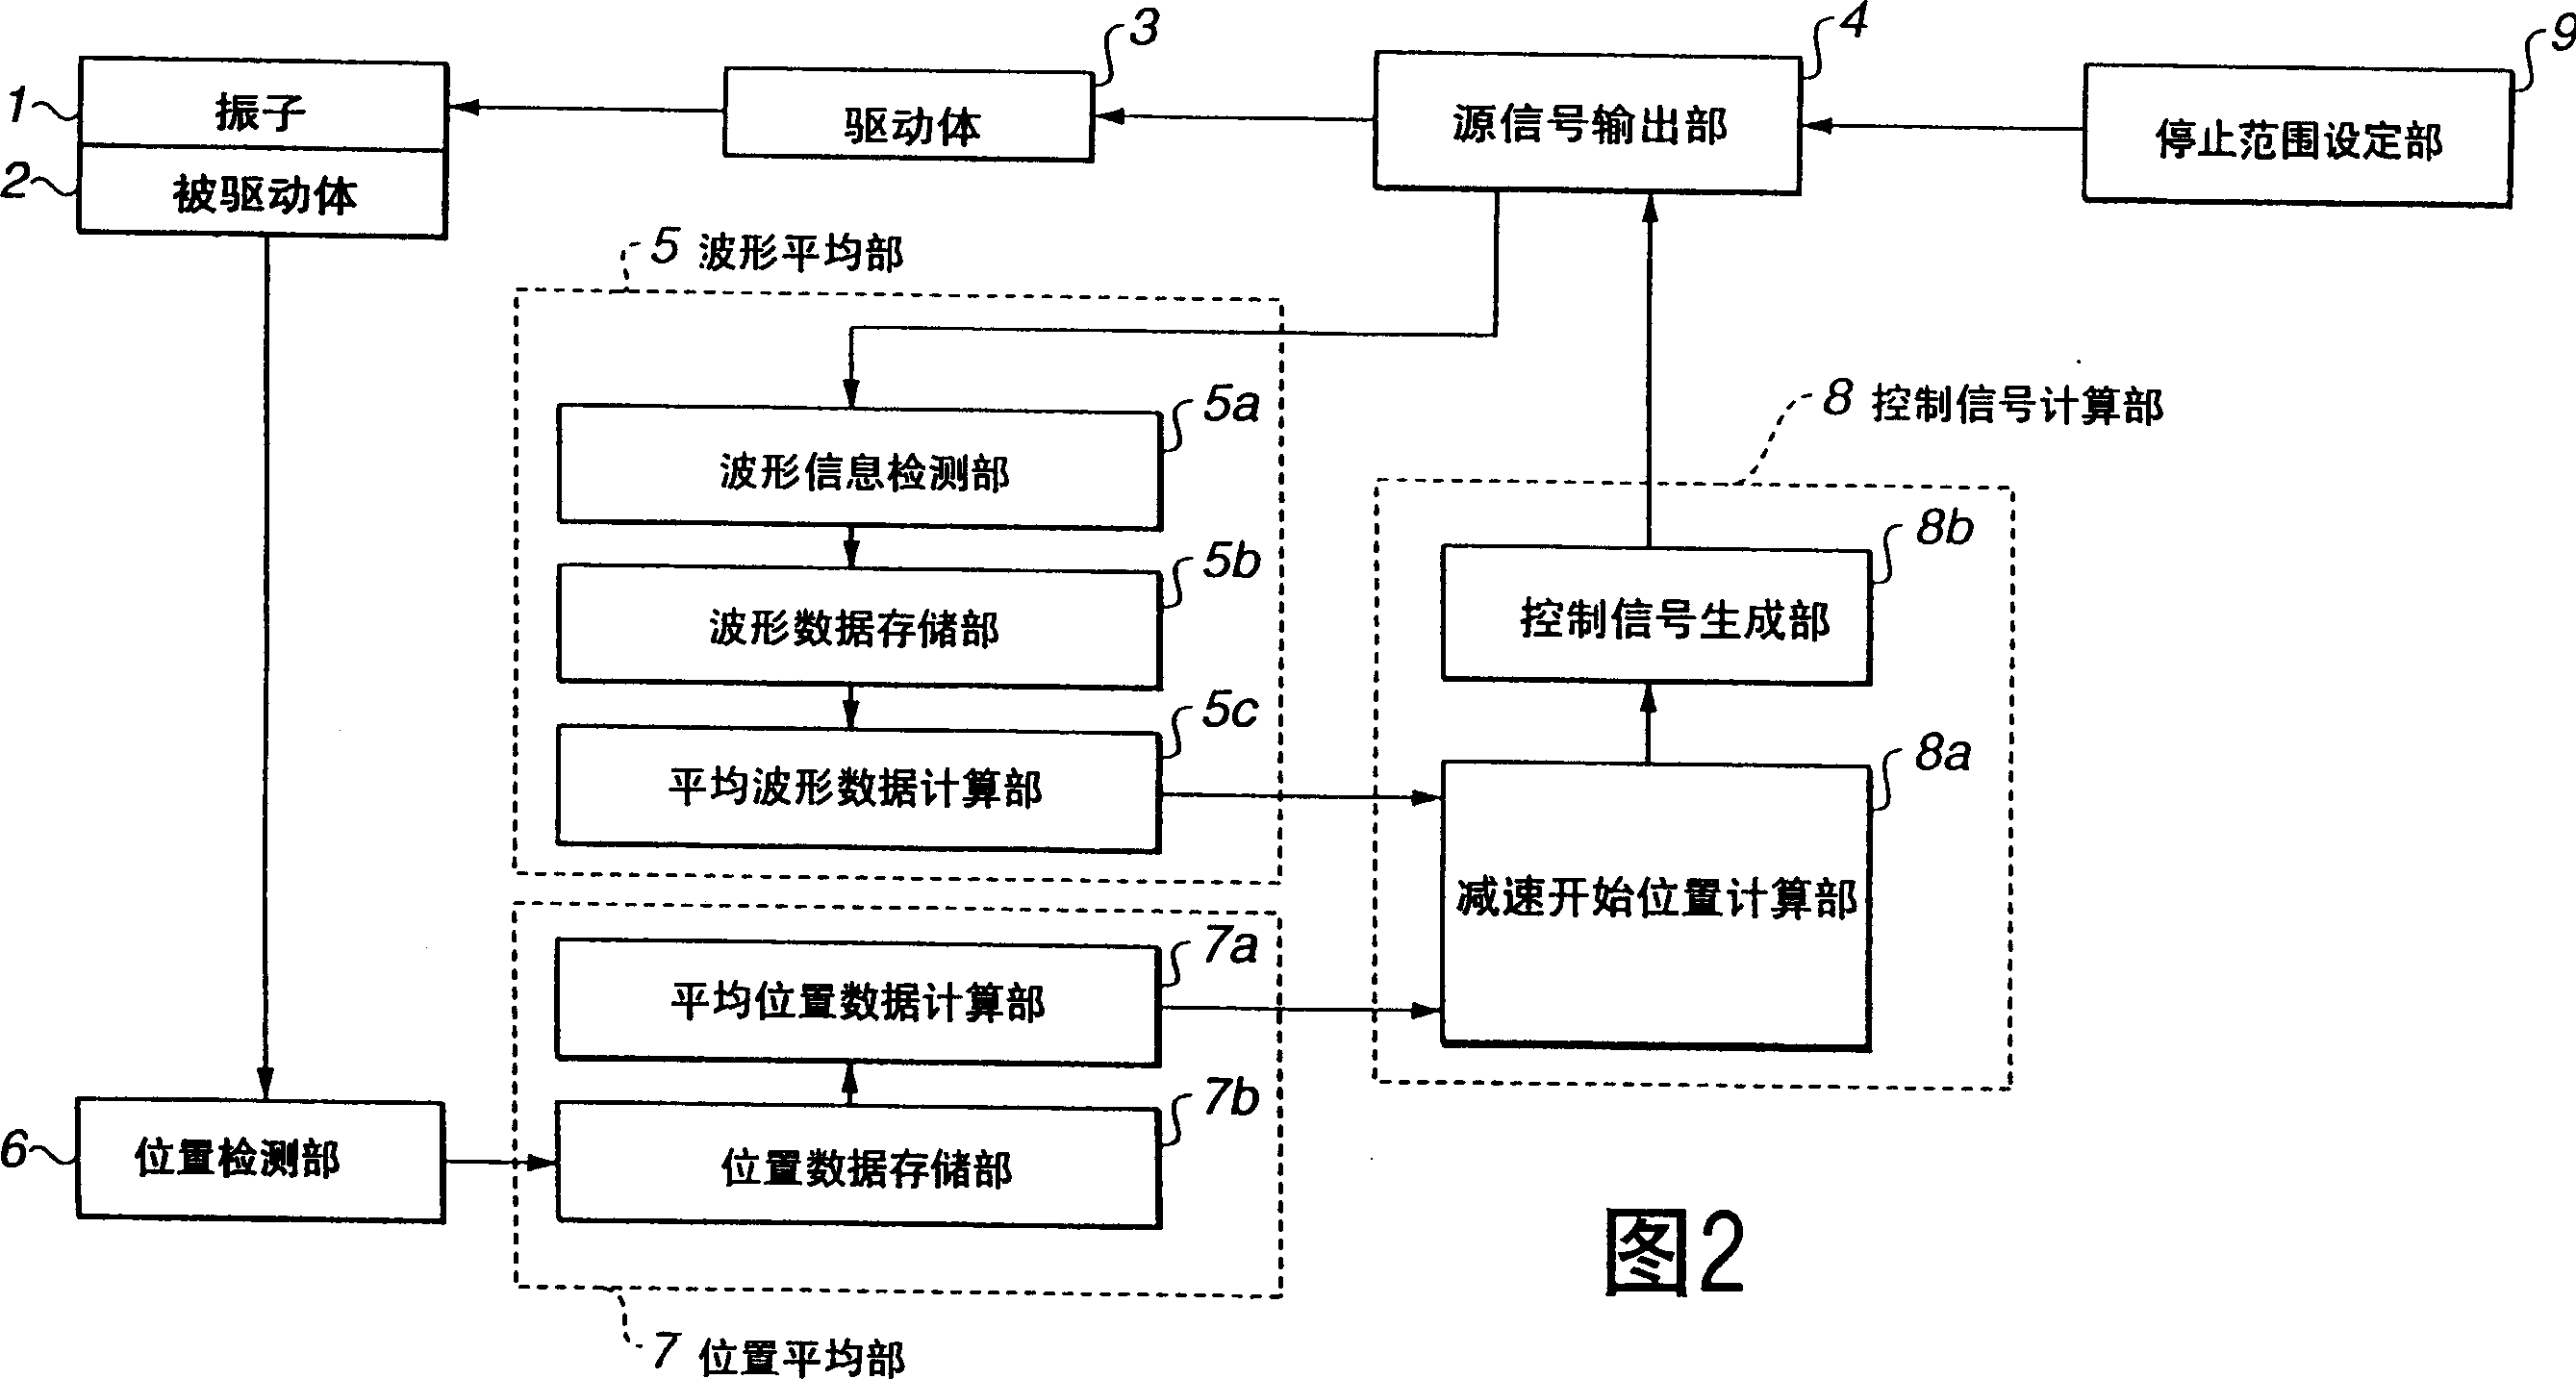 Ultrasonic-actuator driving apparatus and ultrasonic-actuator driving method